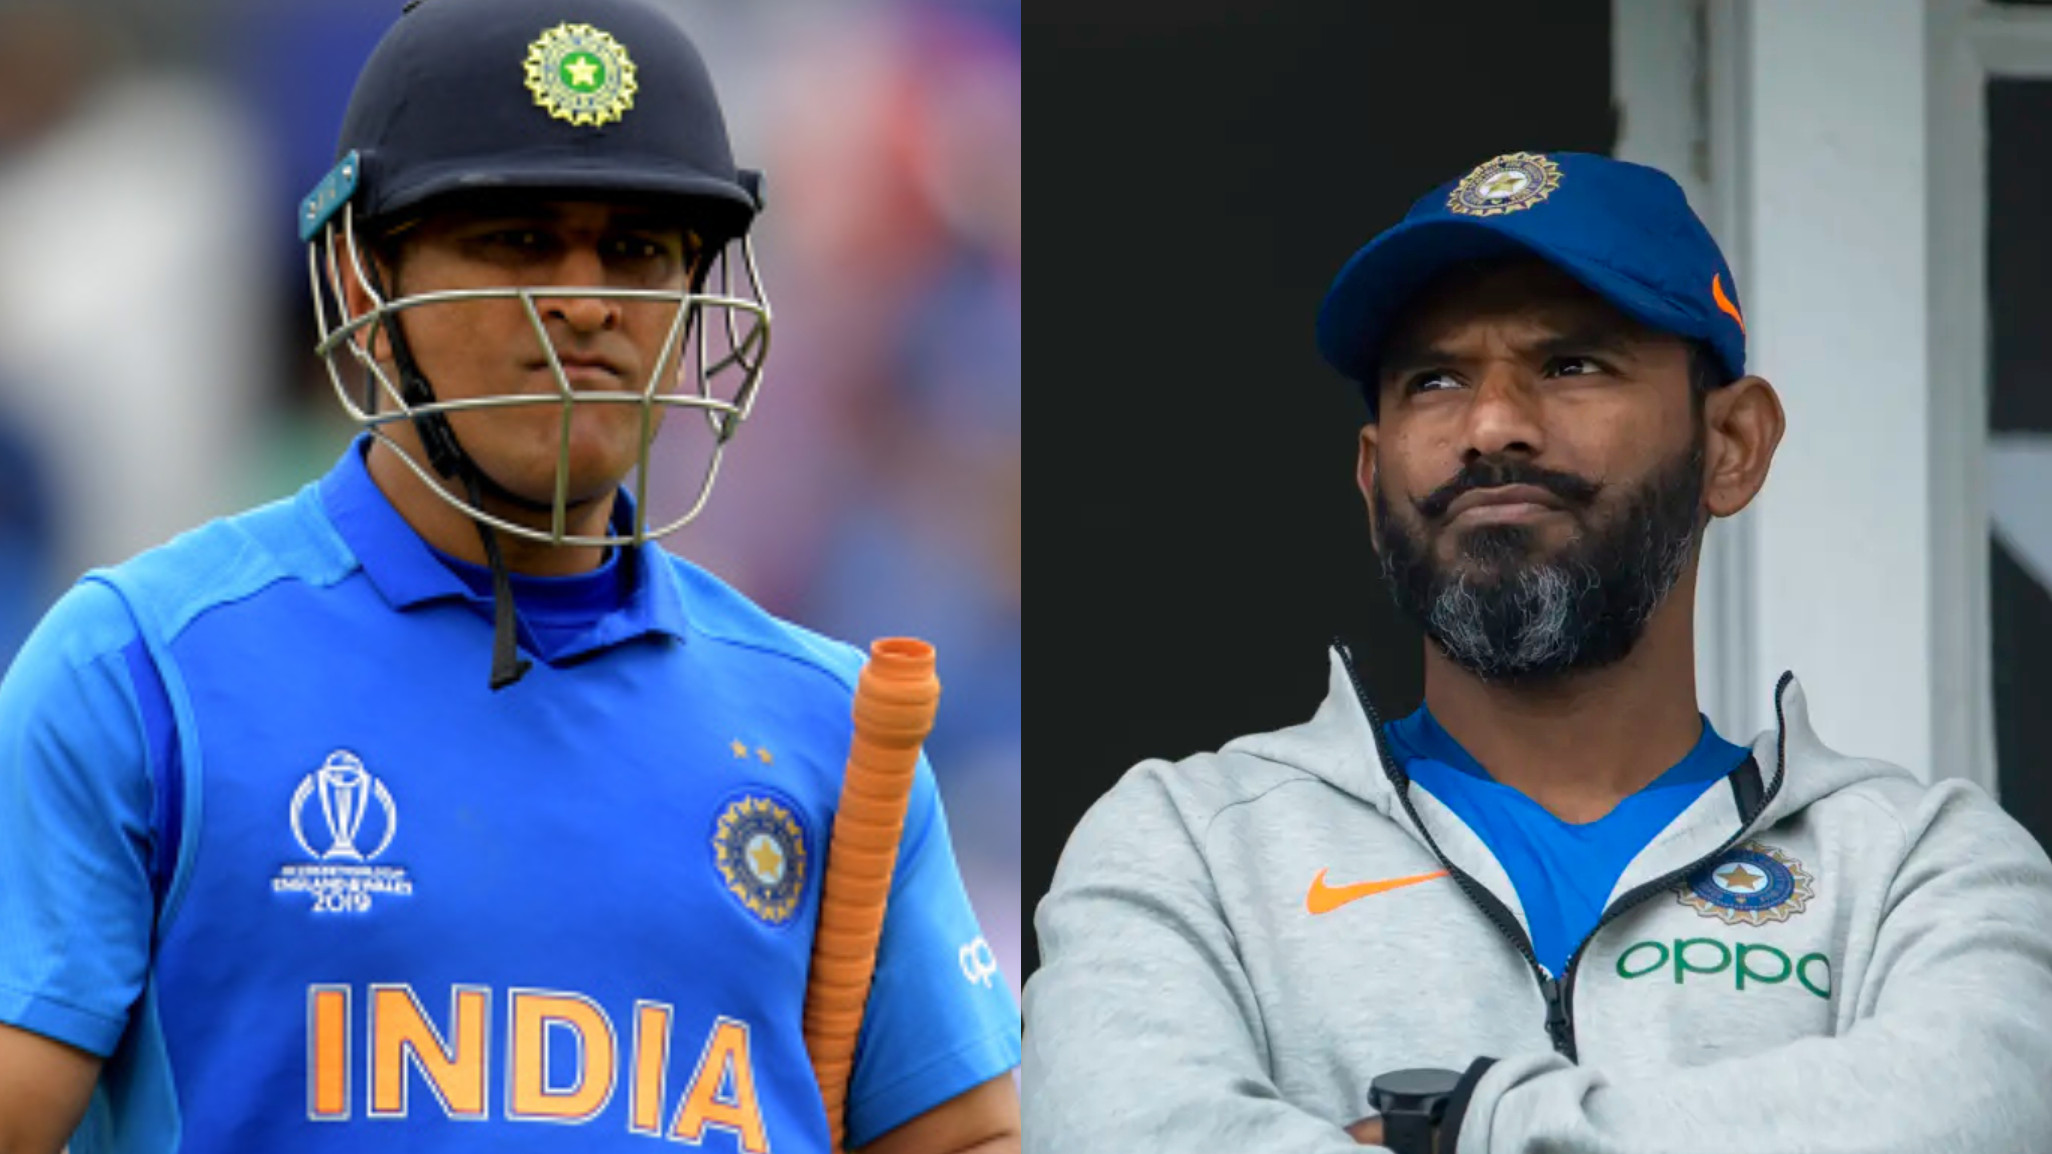 R Sridhar reveals how he found that MS Dhoni planned to retire from international cricket after 2019 WC